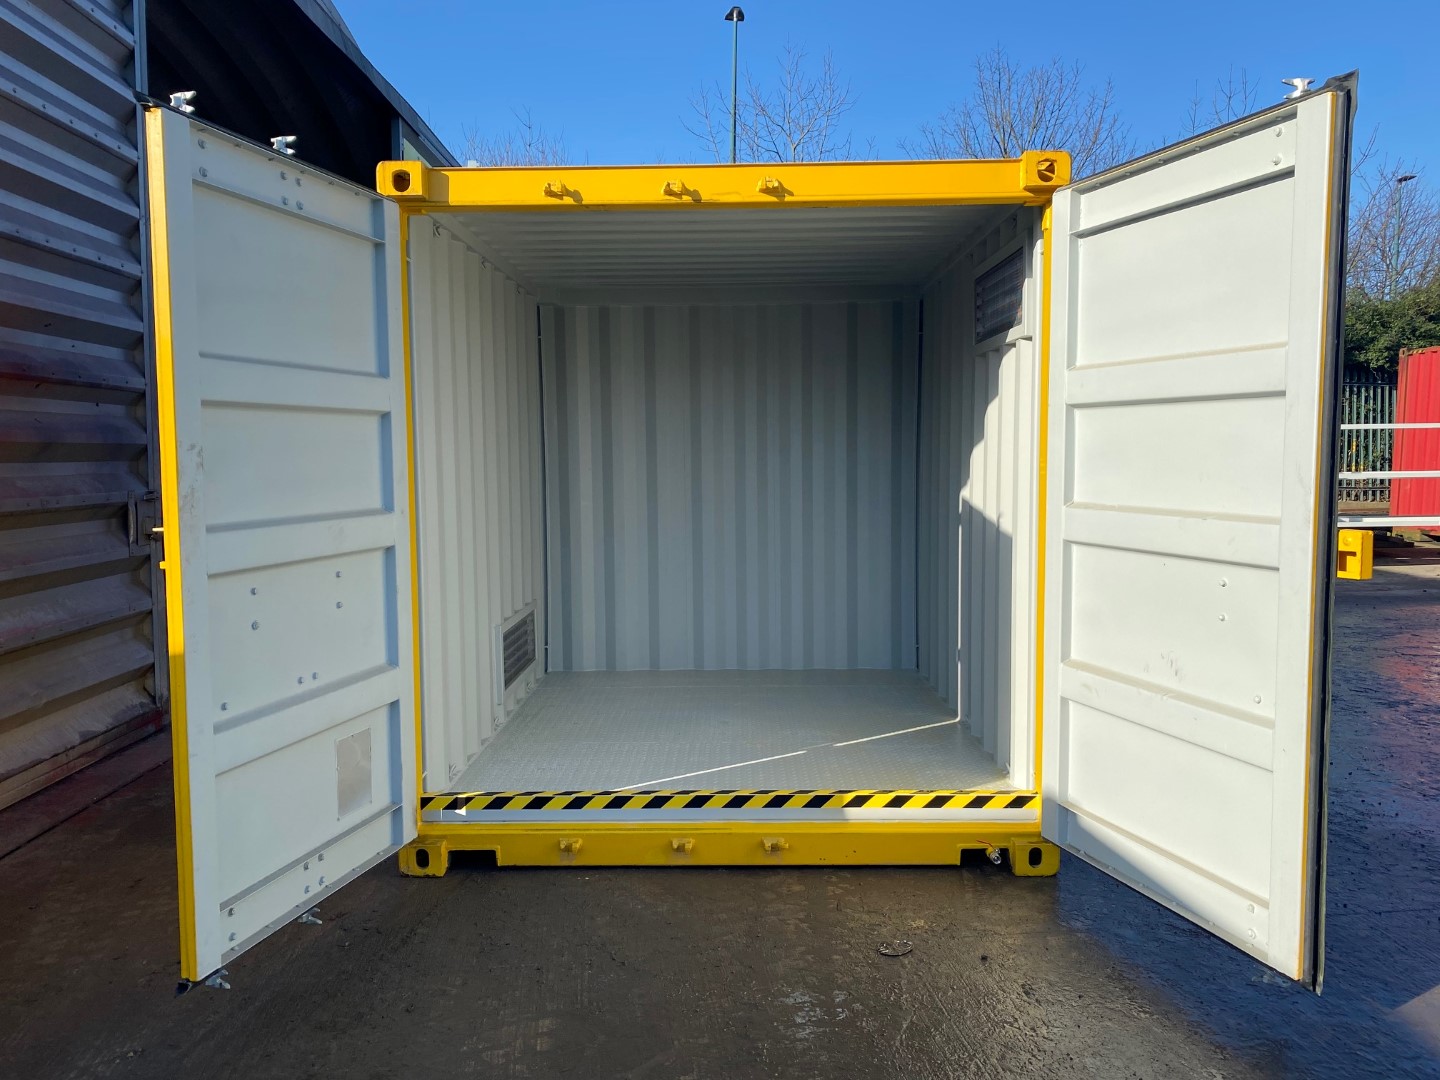 UK Providers of Secure Chemical Storage Units